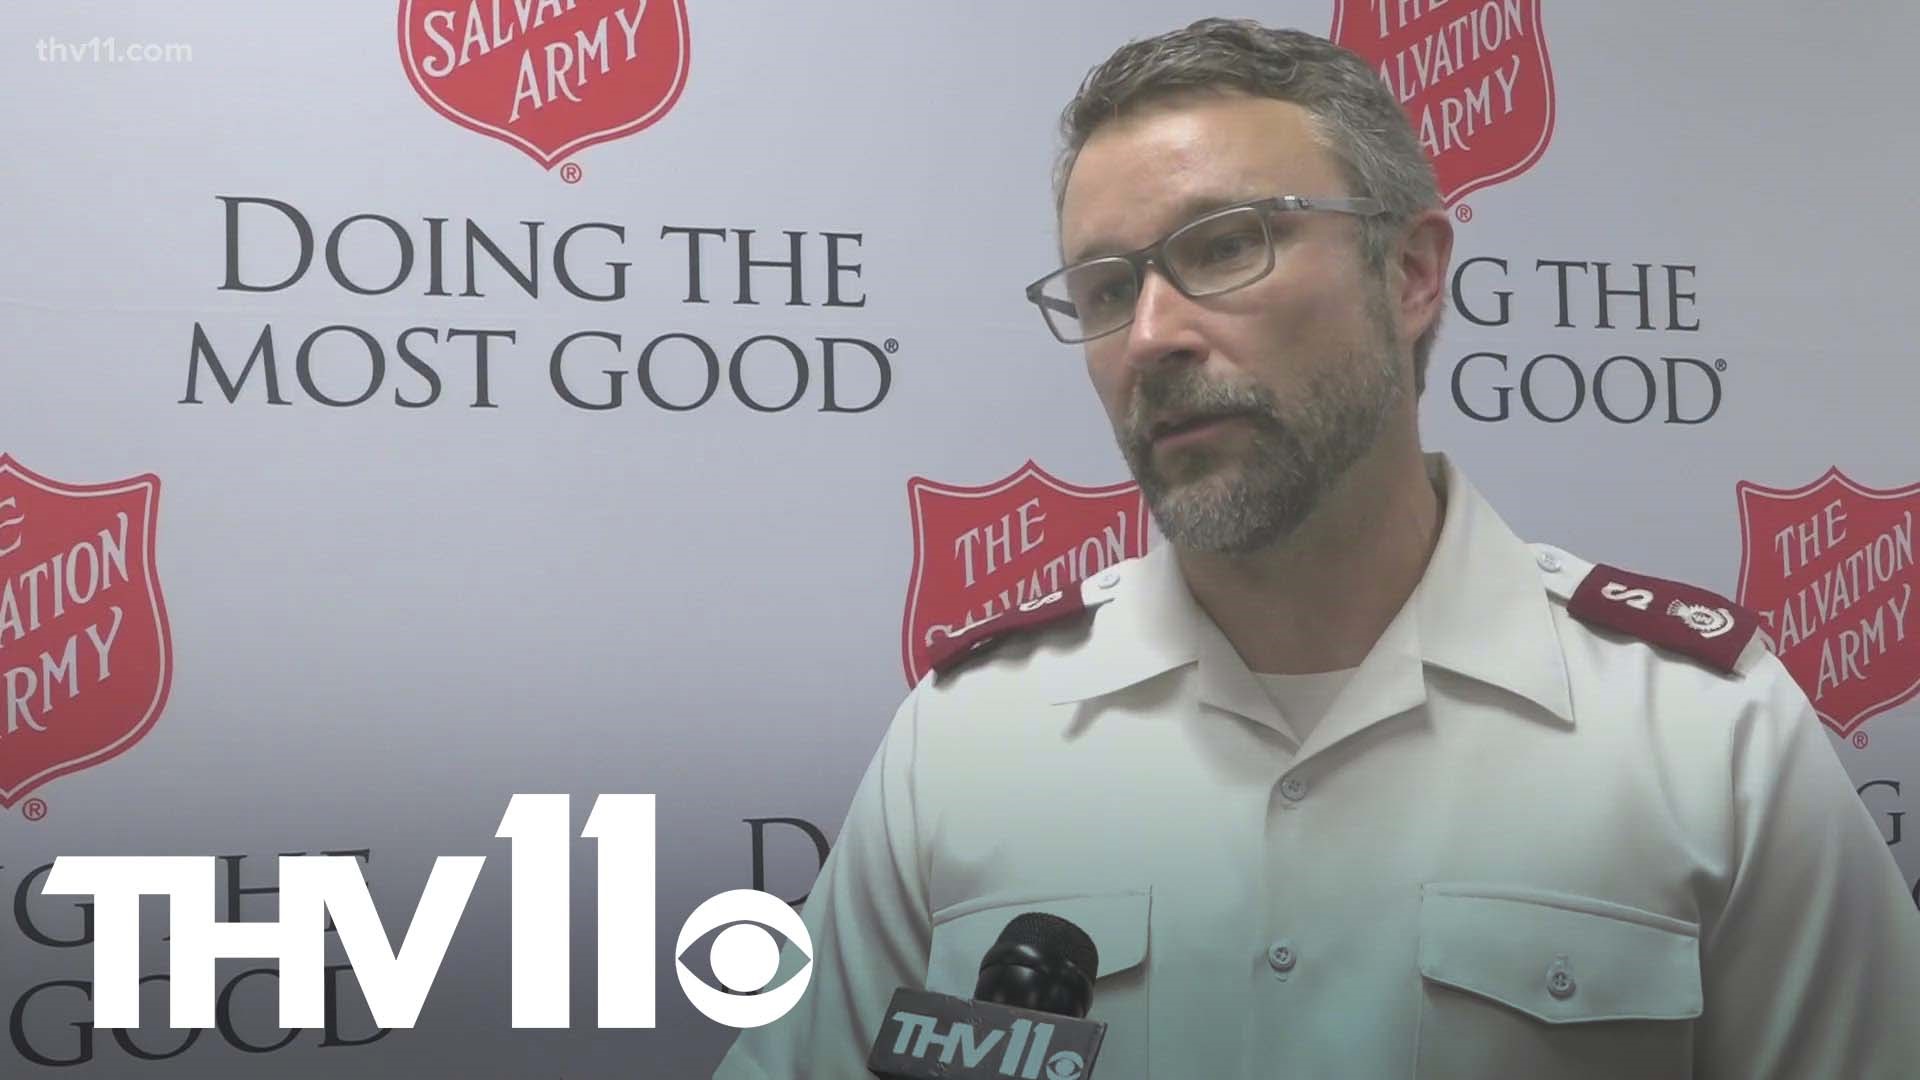 The Salvation Army is now offering a required training for any Arkansans who want to join their ongoing tornado recovery efforts across the state.